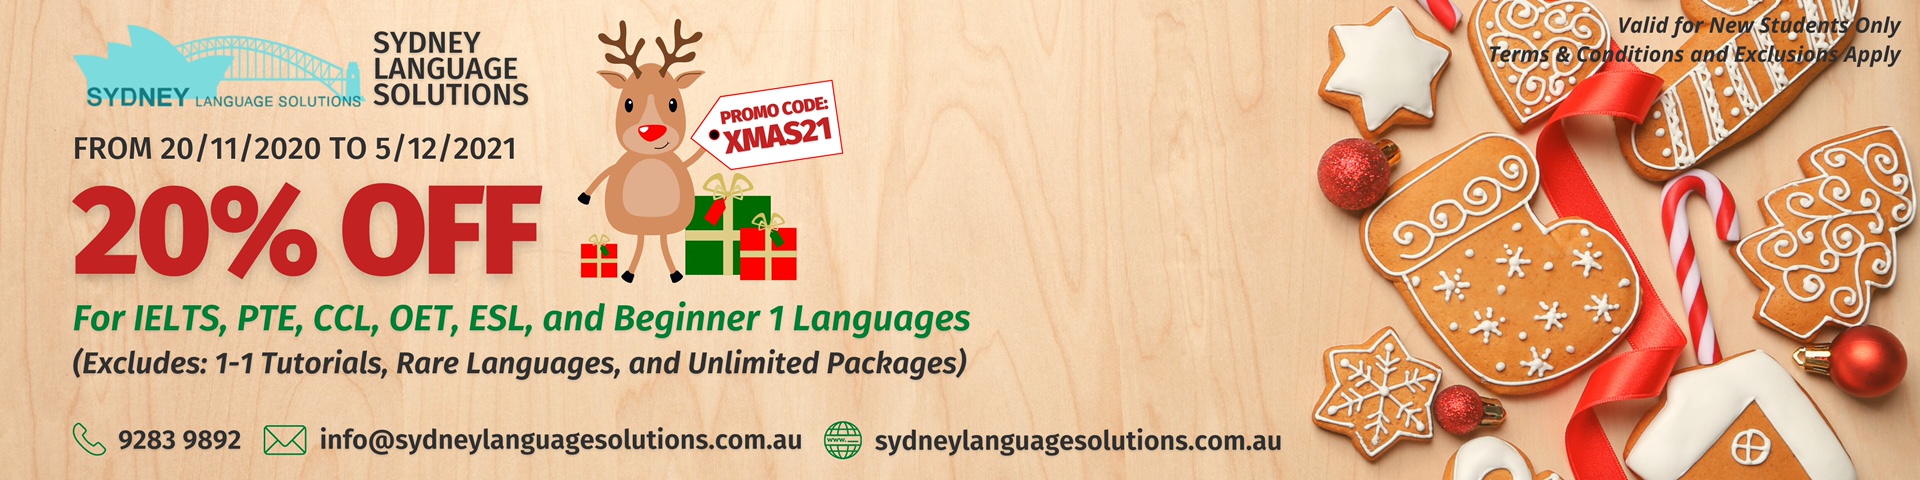 20% off language for kids, language for adults, oet, pte, ielts